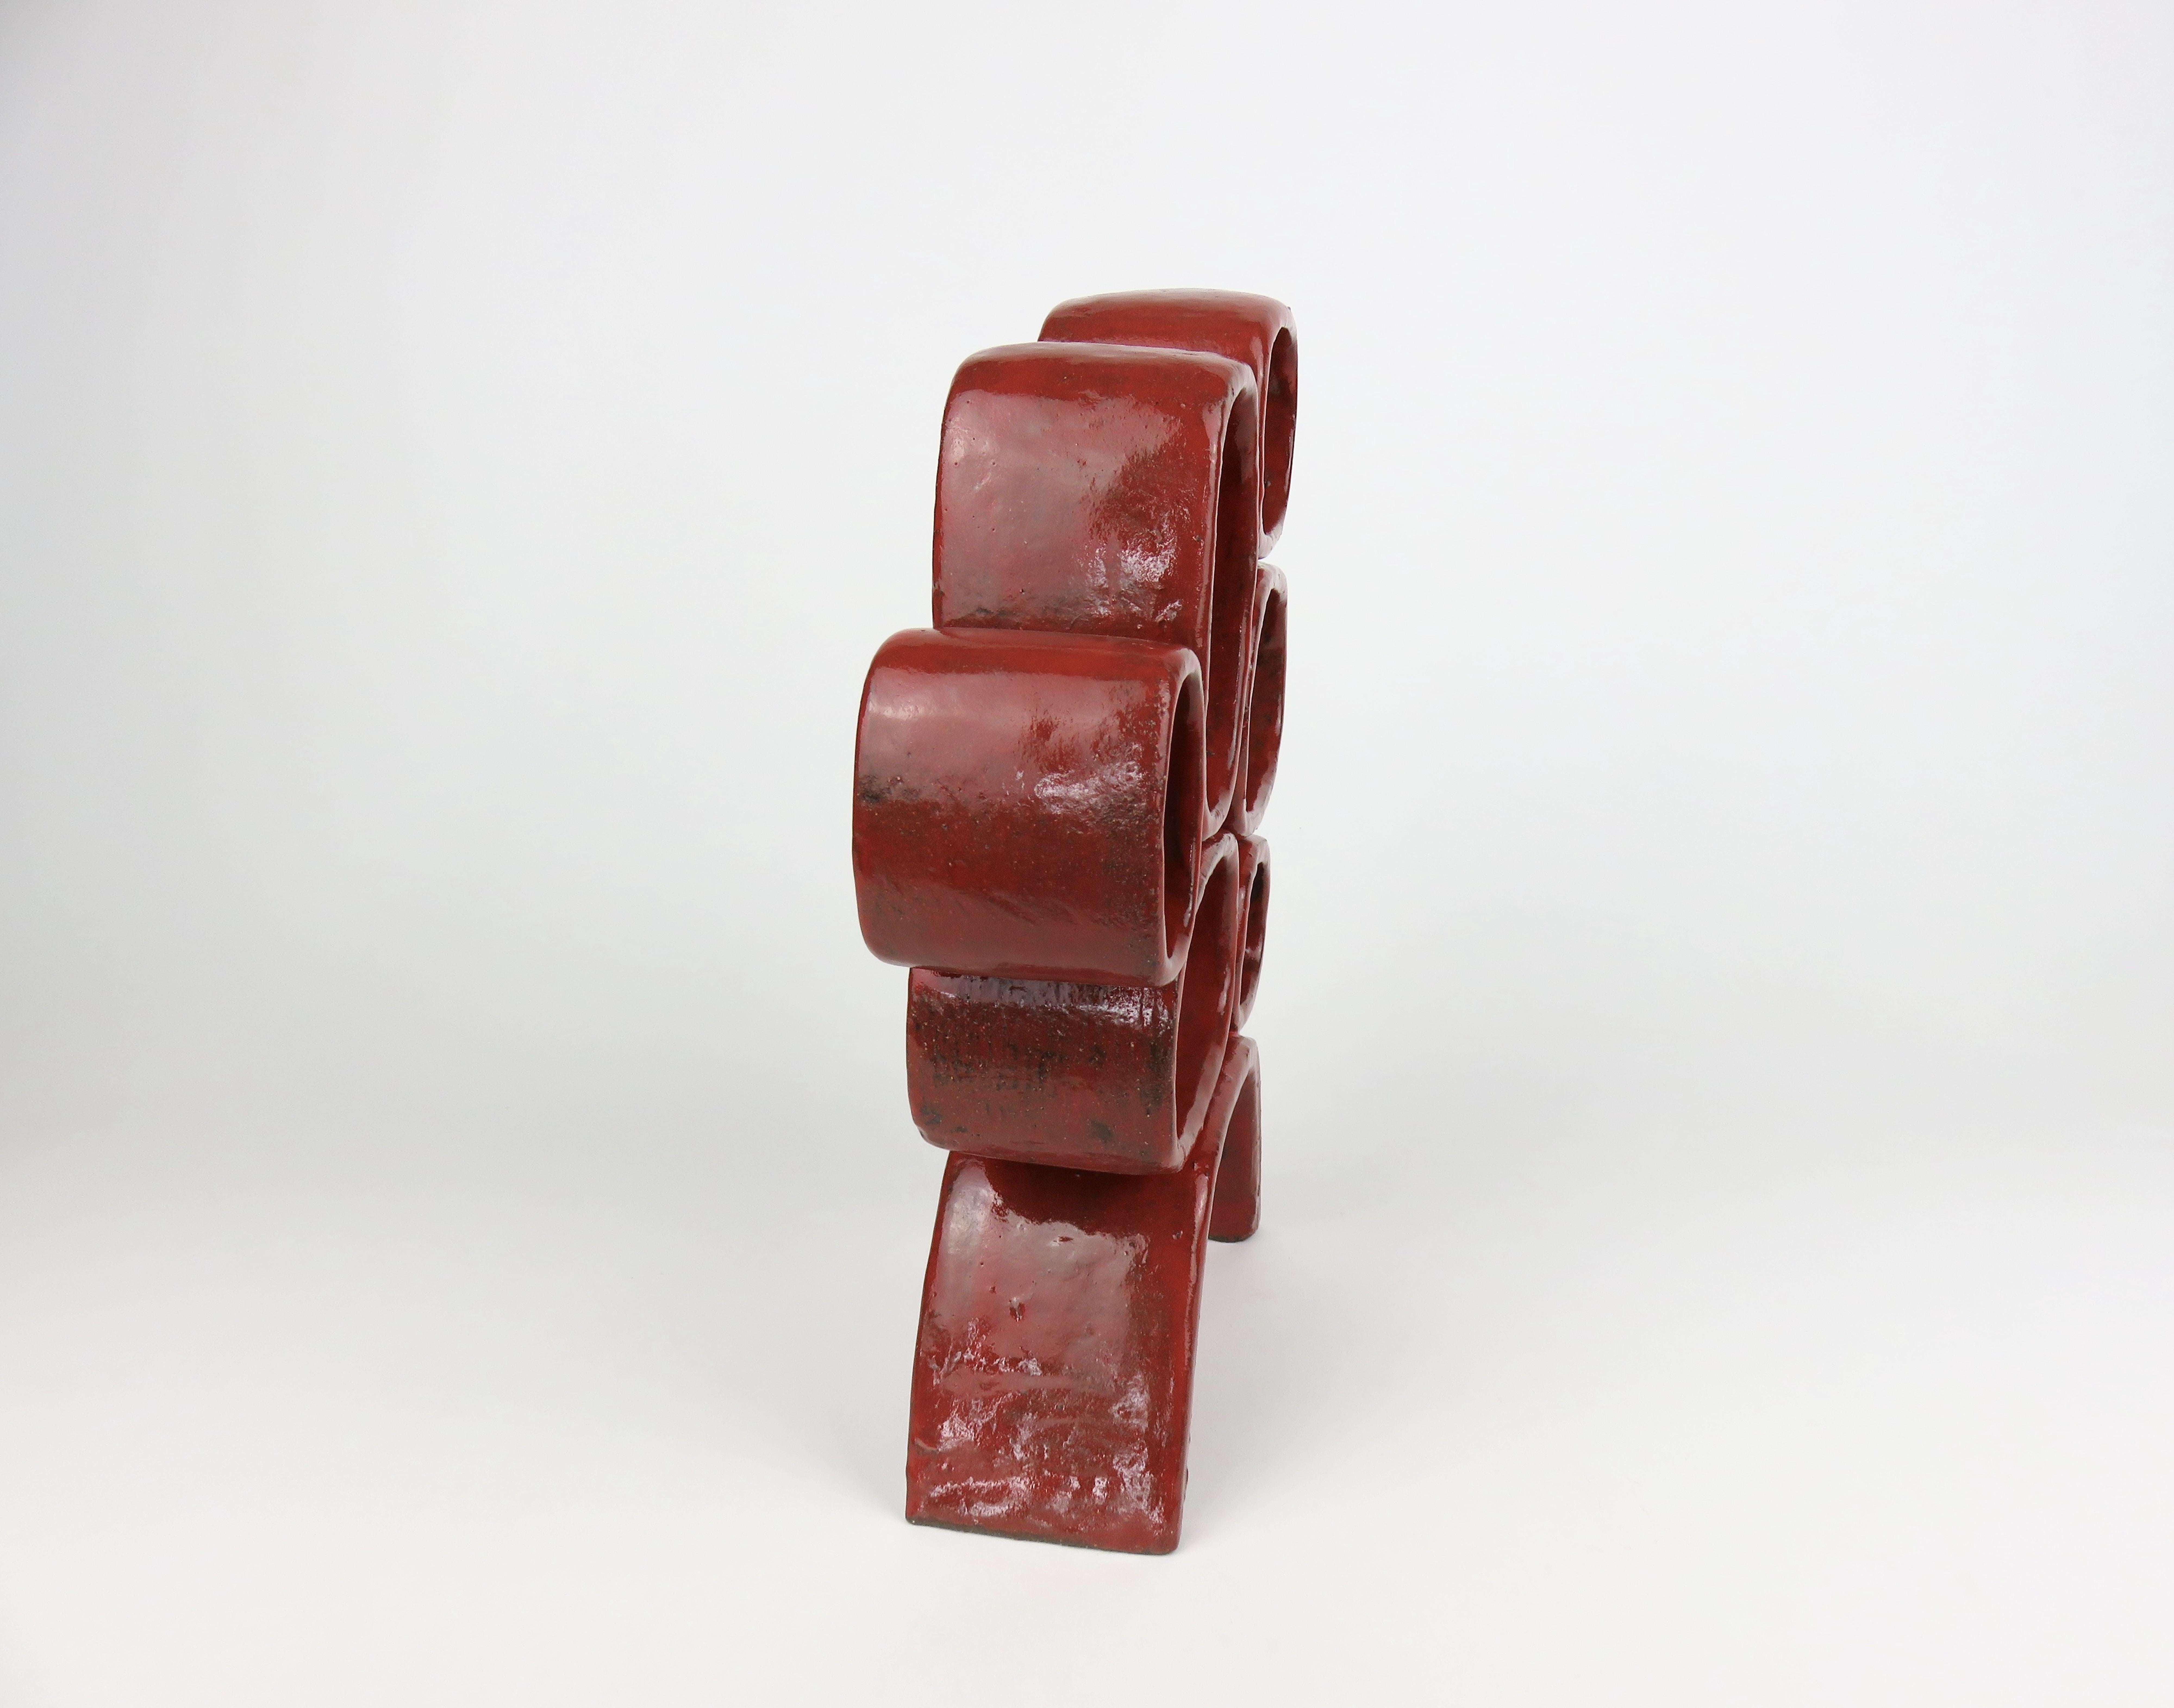 Organic Modern Bright Red Ceramic Sculpture, Hand Built, Six Soft Rectangles on Angled Legs For Sale